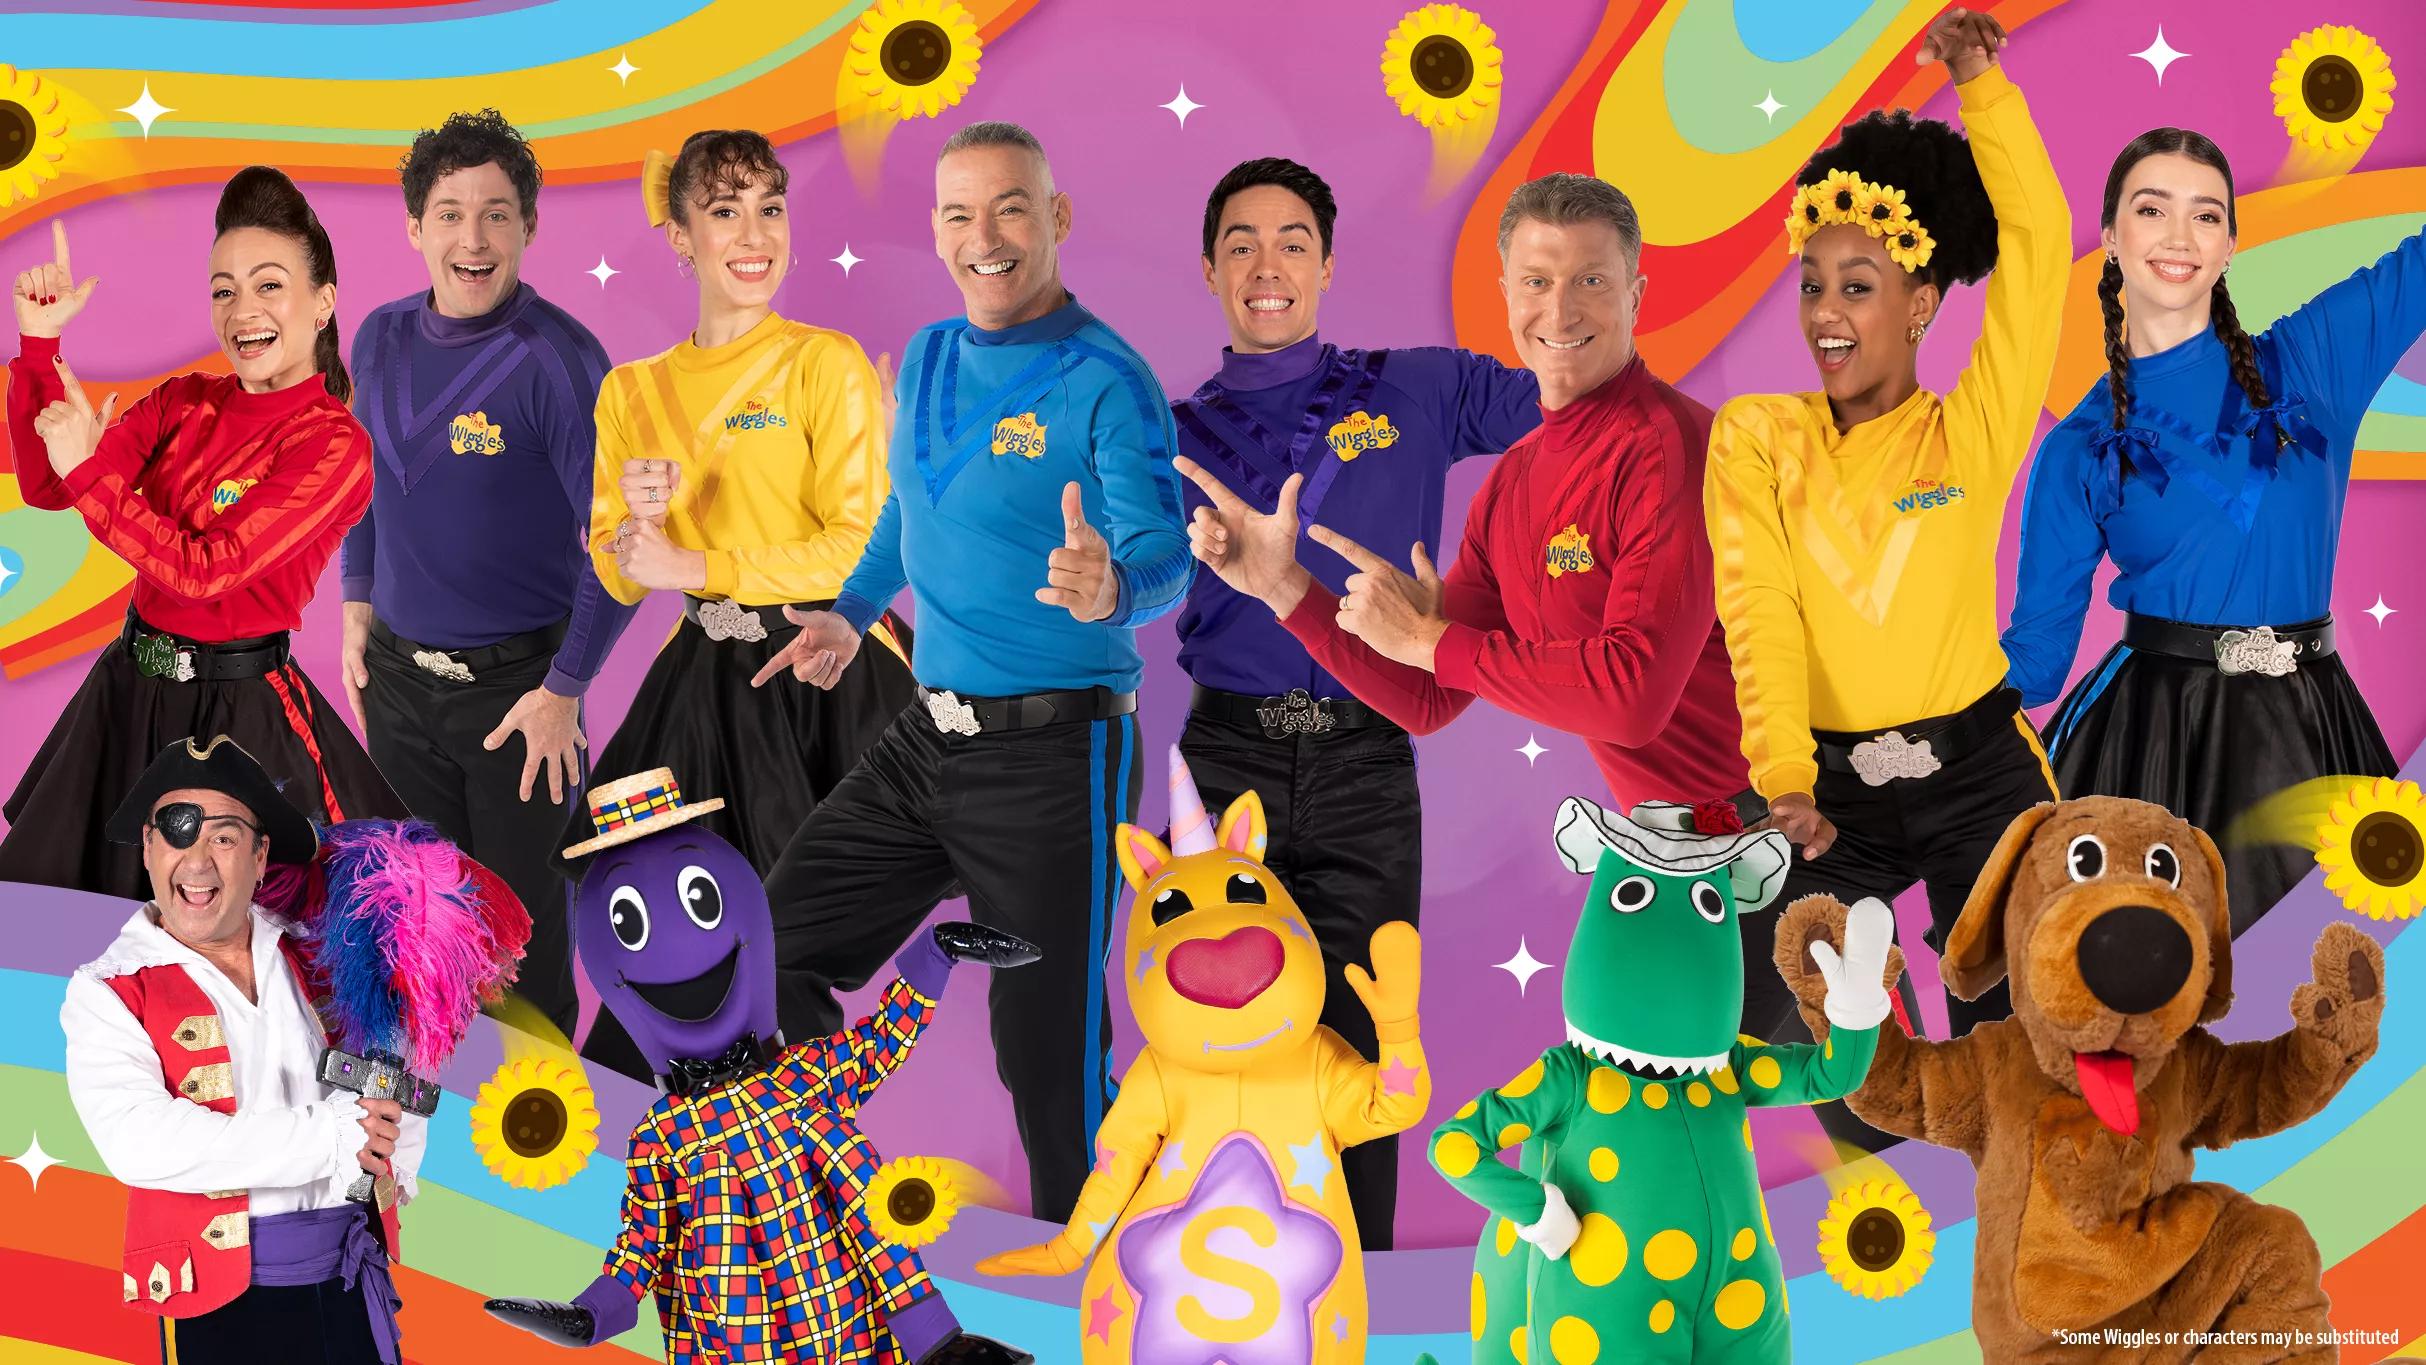 The Wiggles' Wiggle Groove Tour comes to Wellington - WellingtonNZ